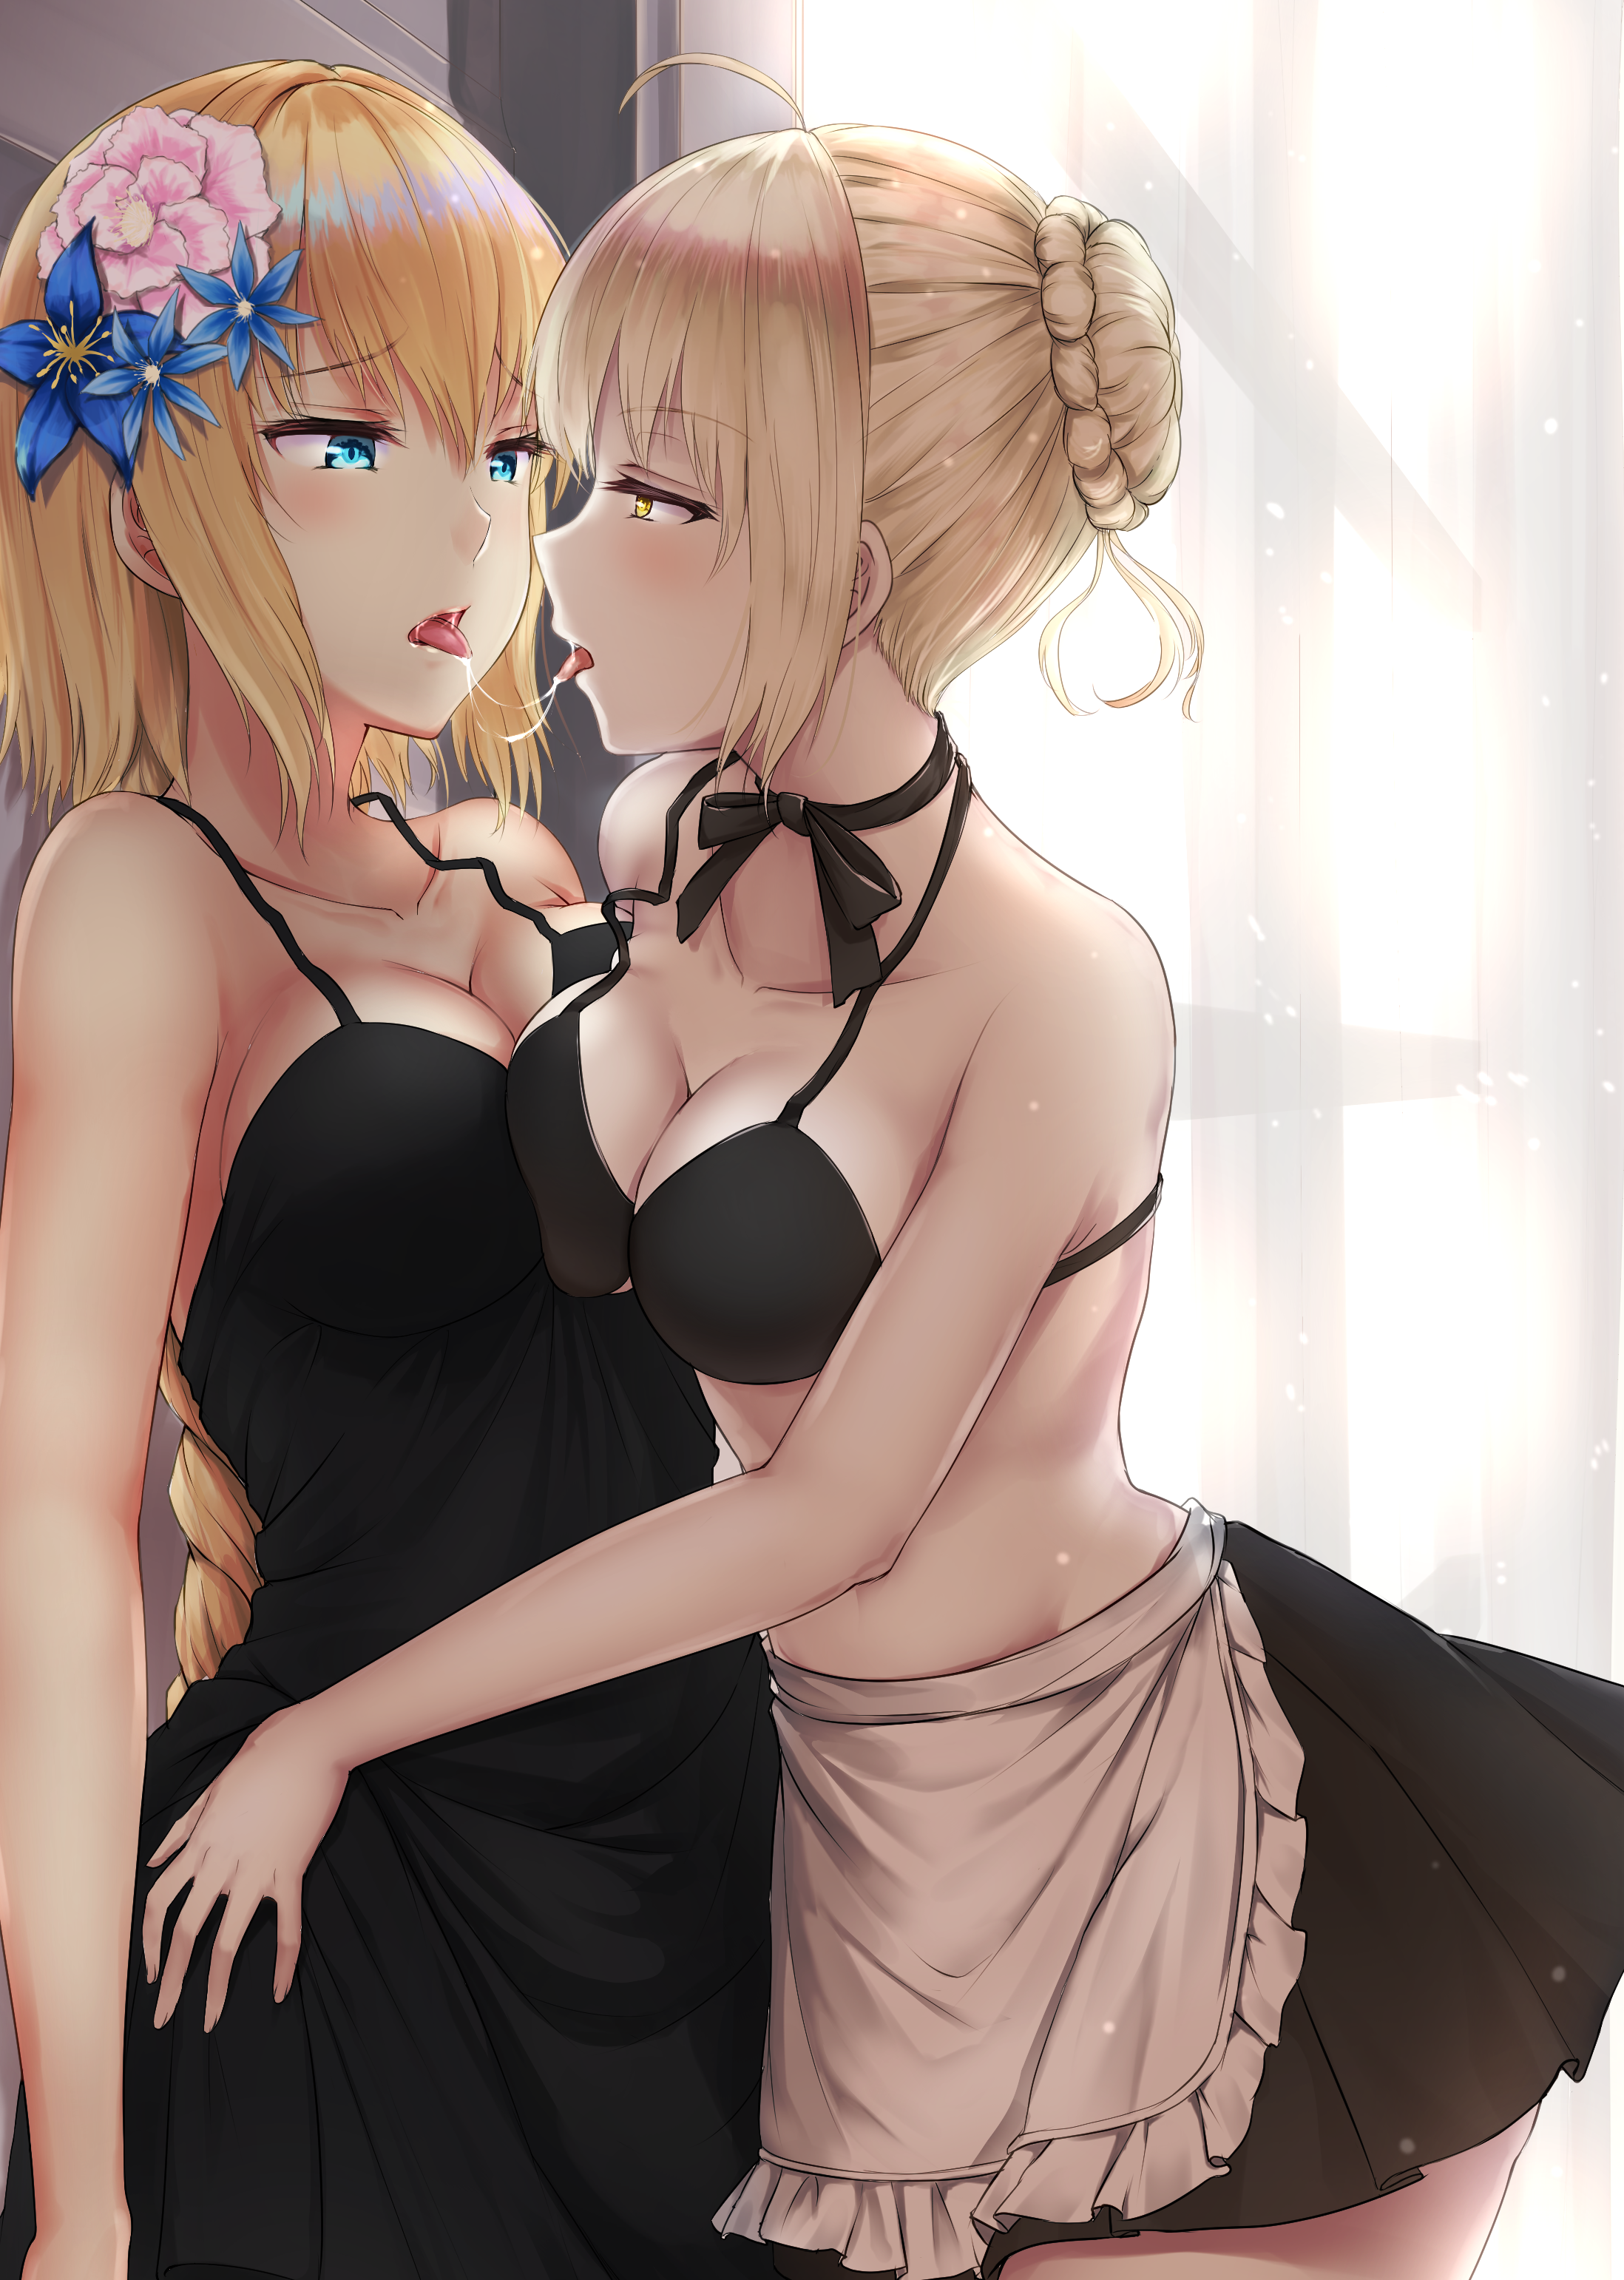 Anime 2196x3083 boobs on boobs hugging thick ass thighs black dress maid outfit anime girls Fate series long hair ahoge ecchi 2D glutes Saber Alter fan art anime curvy Primamiya artwork Artoria Pendragon yuri lesbians Fate/Grand Order fate/stay night: heaven's feel Fate/Apocrypha  blonde maid bikini pressed boobs frontal view saliva trail portrait display saliva hair between eyes bangs indoors women indoors hairbun tongue out embarrassed kissing big boobs bare shoulders wide hips aqua eyes belly button sideboob cleavage flower in hair french braids curtains Ruler (Fate/Apocrypha) Jeanne d'Arc (Fate) maid tongues